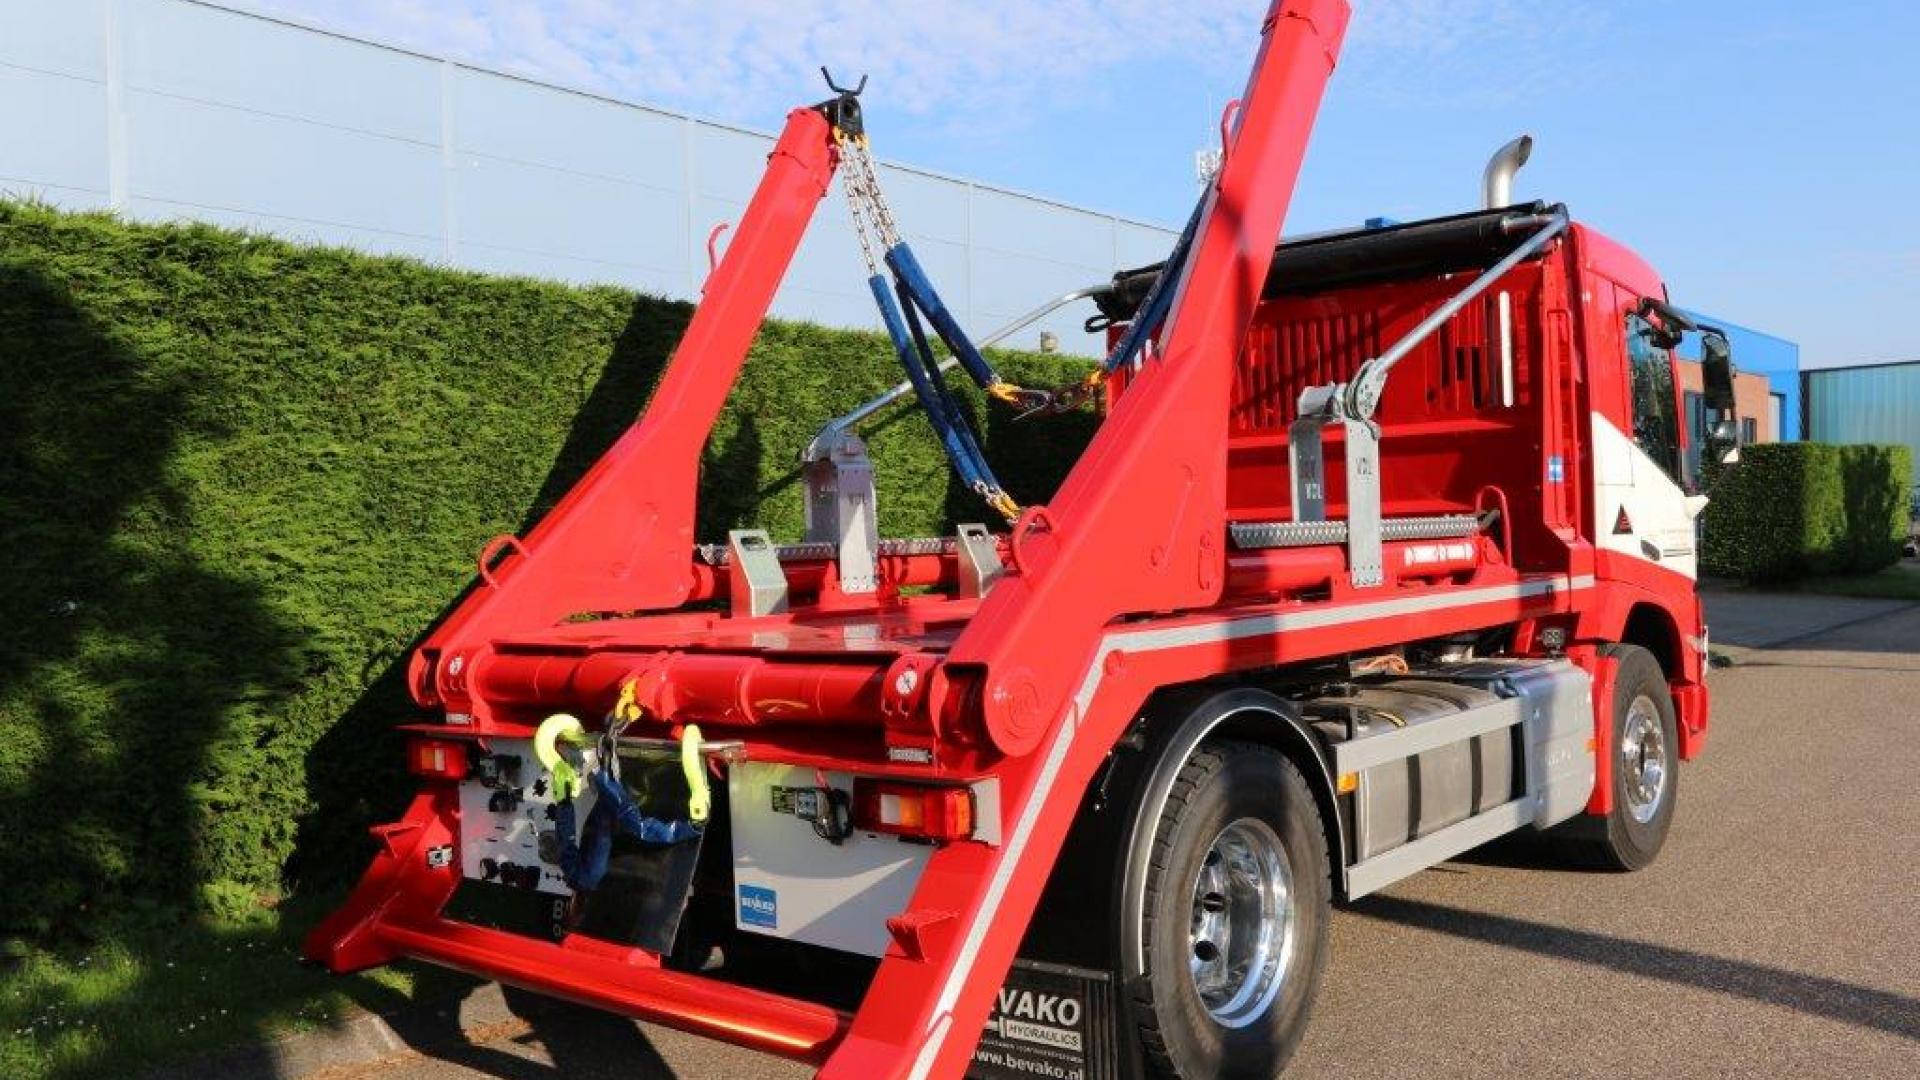 Second skiploader for Van Leeuwen Recycling Group in Rotterdam